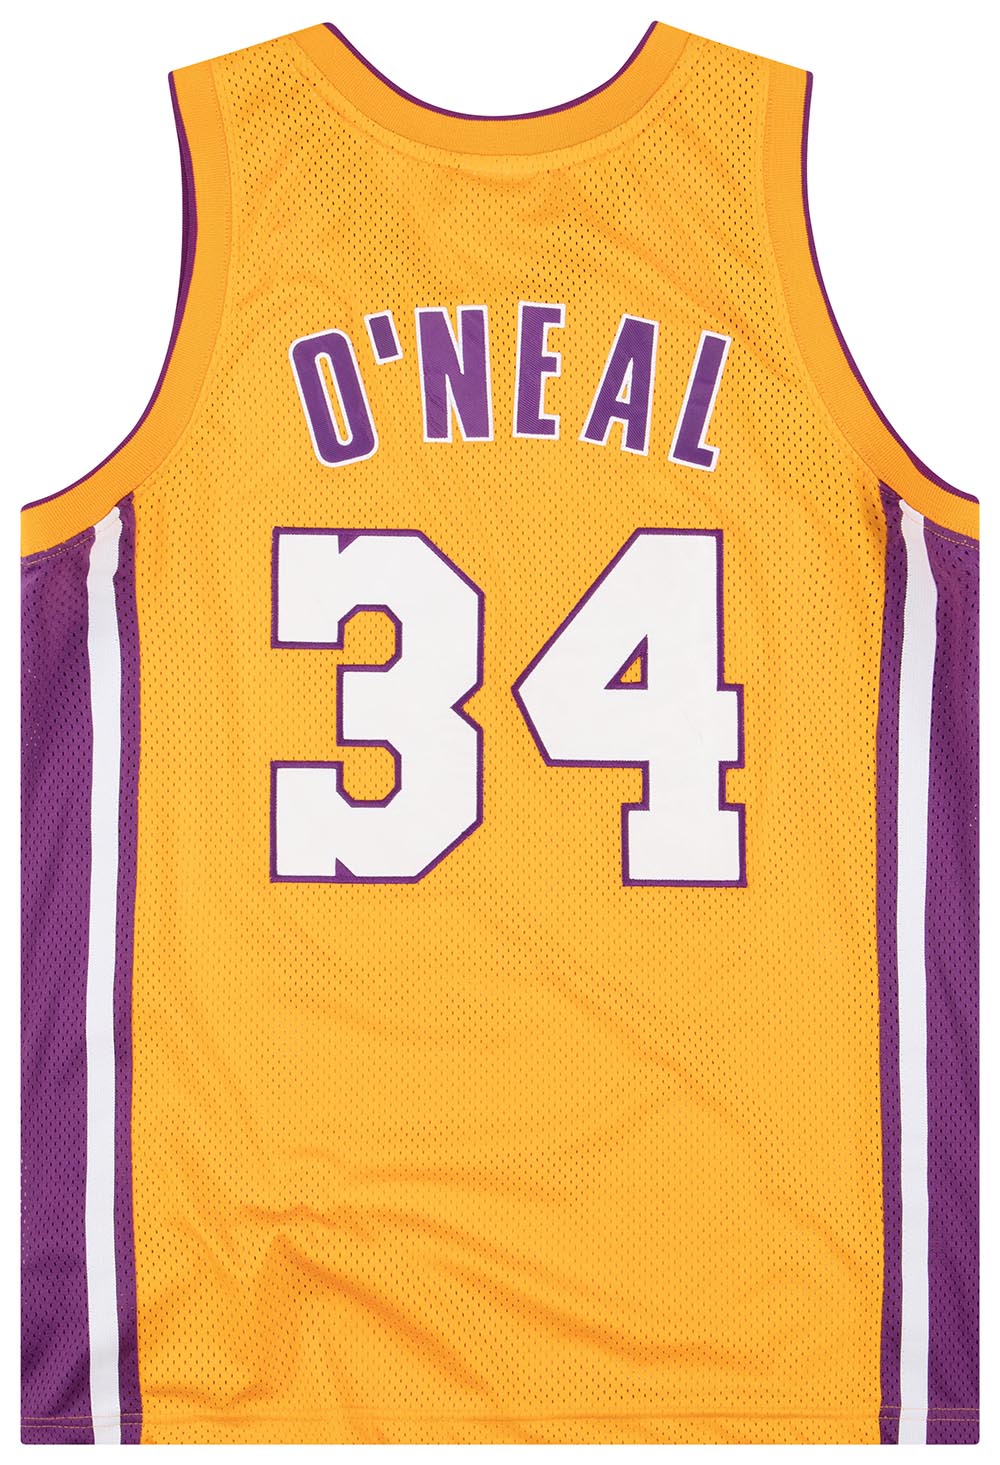 1999-04 AUTHENTIC LA LAKERS O'NEAL #34 CHAMPION JERSEY (HOME) M - Classic  American Sports